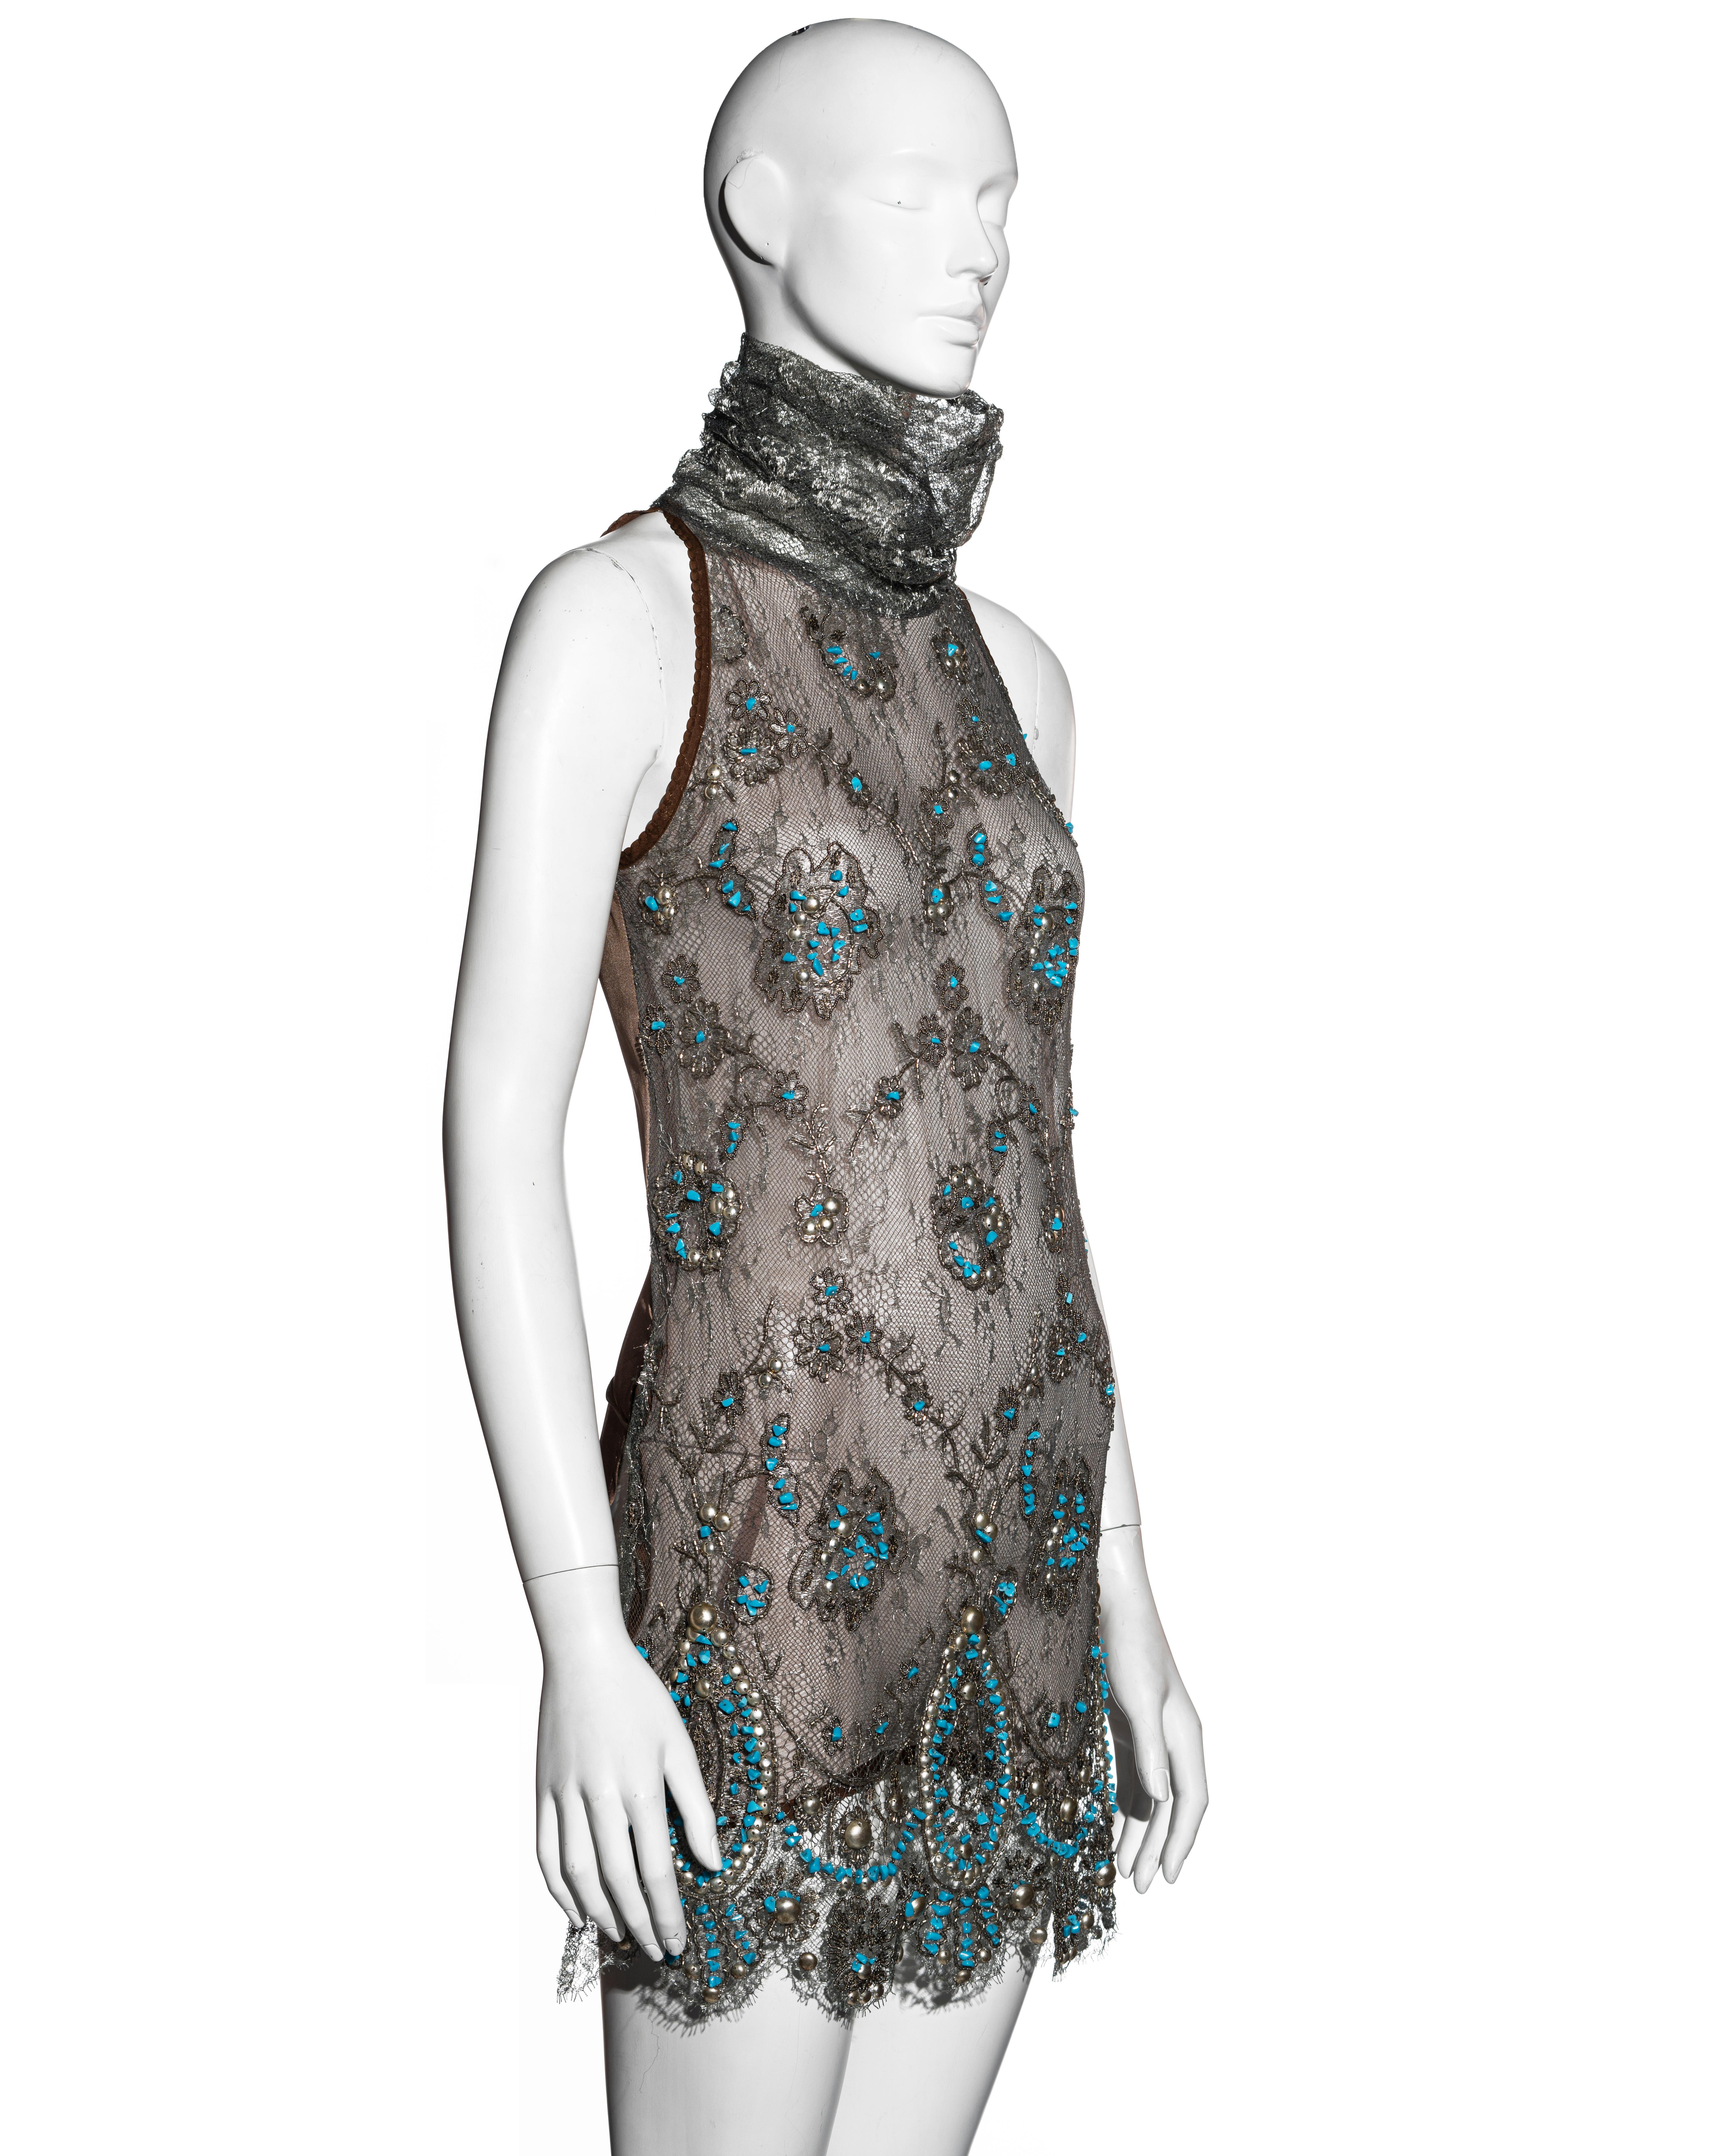 Gianfranco Ferre silver lamé lace embellished mini dress, ss 2006 In Excellent Condition For Sale In London, GB